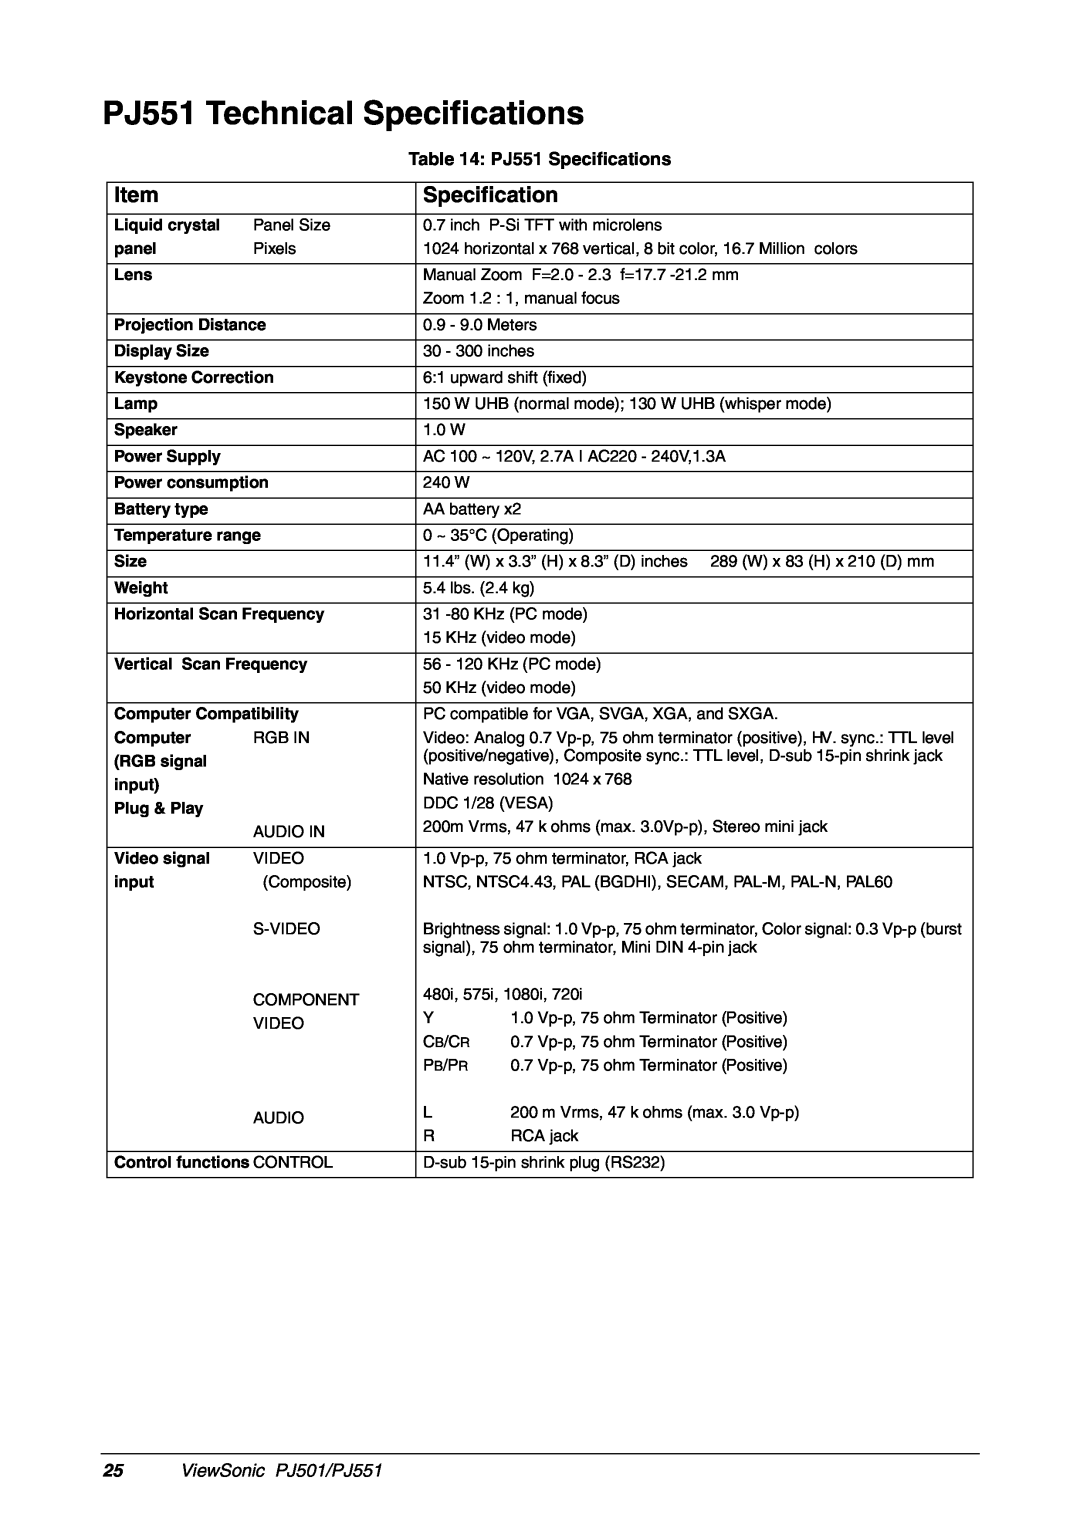 ViewSonic manual PJ551 Technical Specifications, PJ551 Specifications, ViewSonic PJ501/PJ551 